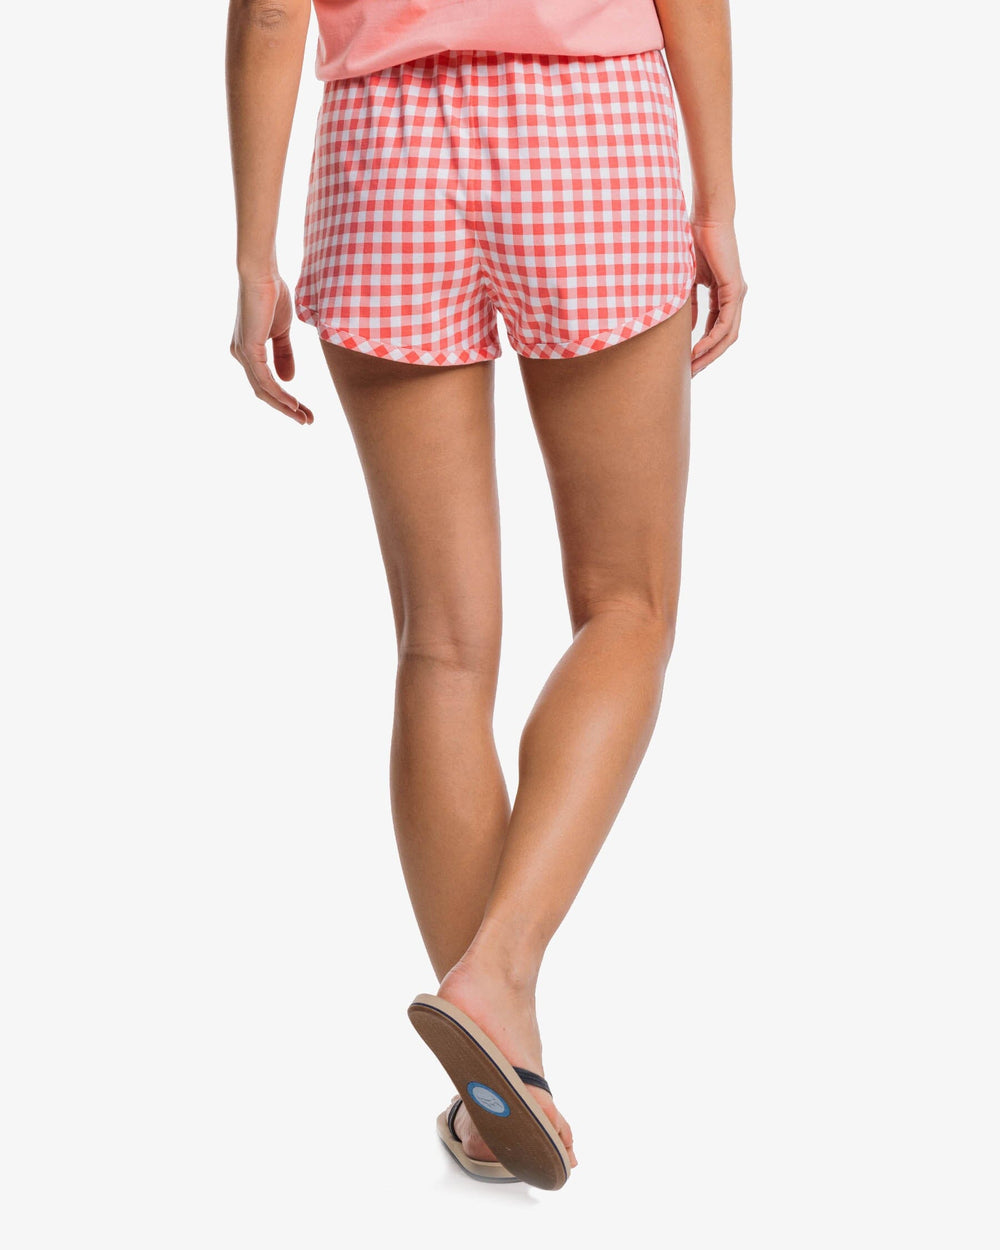 The back view of the Southern Tide Gingham Lounge Short by Southern Tide - Flamingo Pink